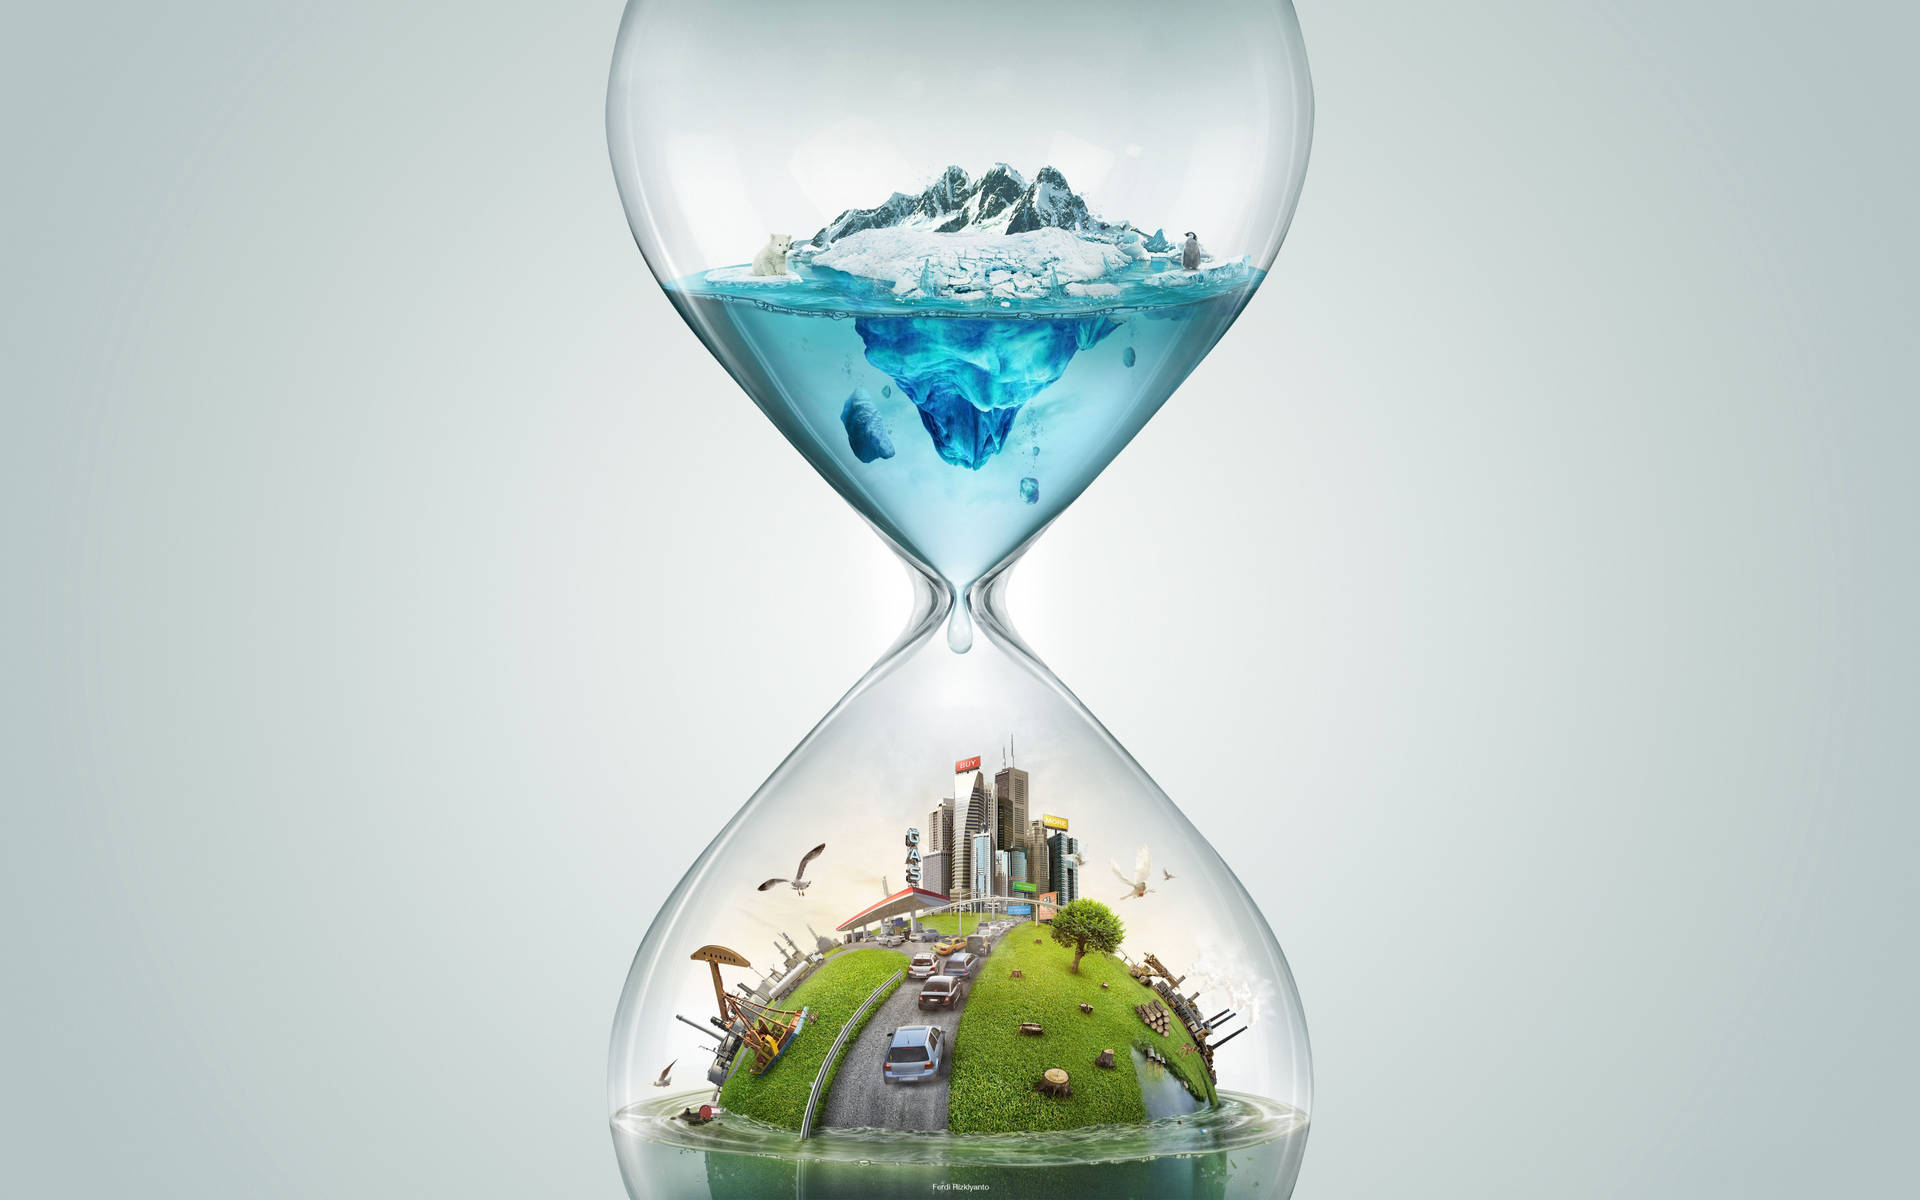 Our Planet's Time - The Earth Day Hourglass